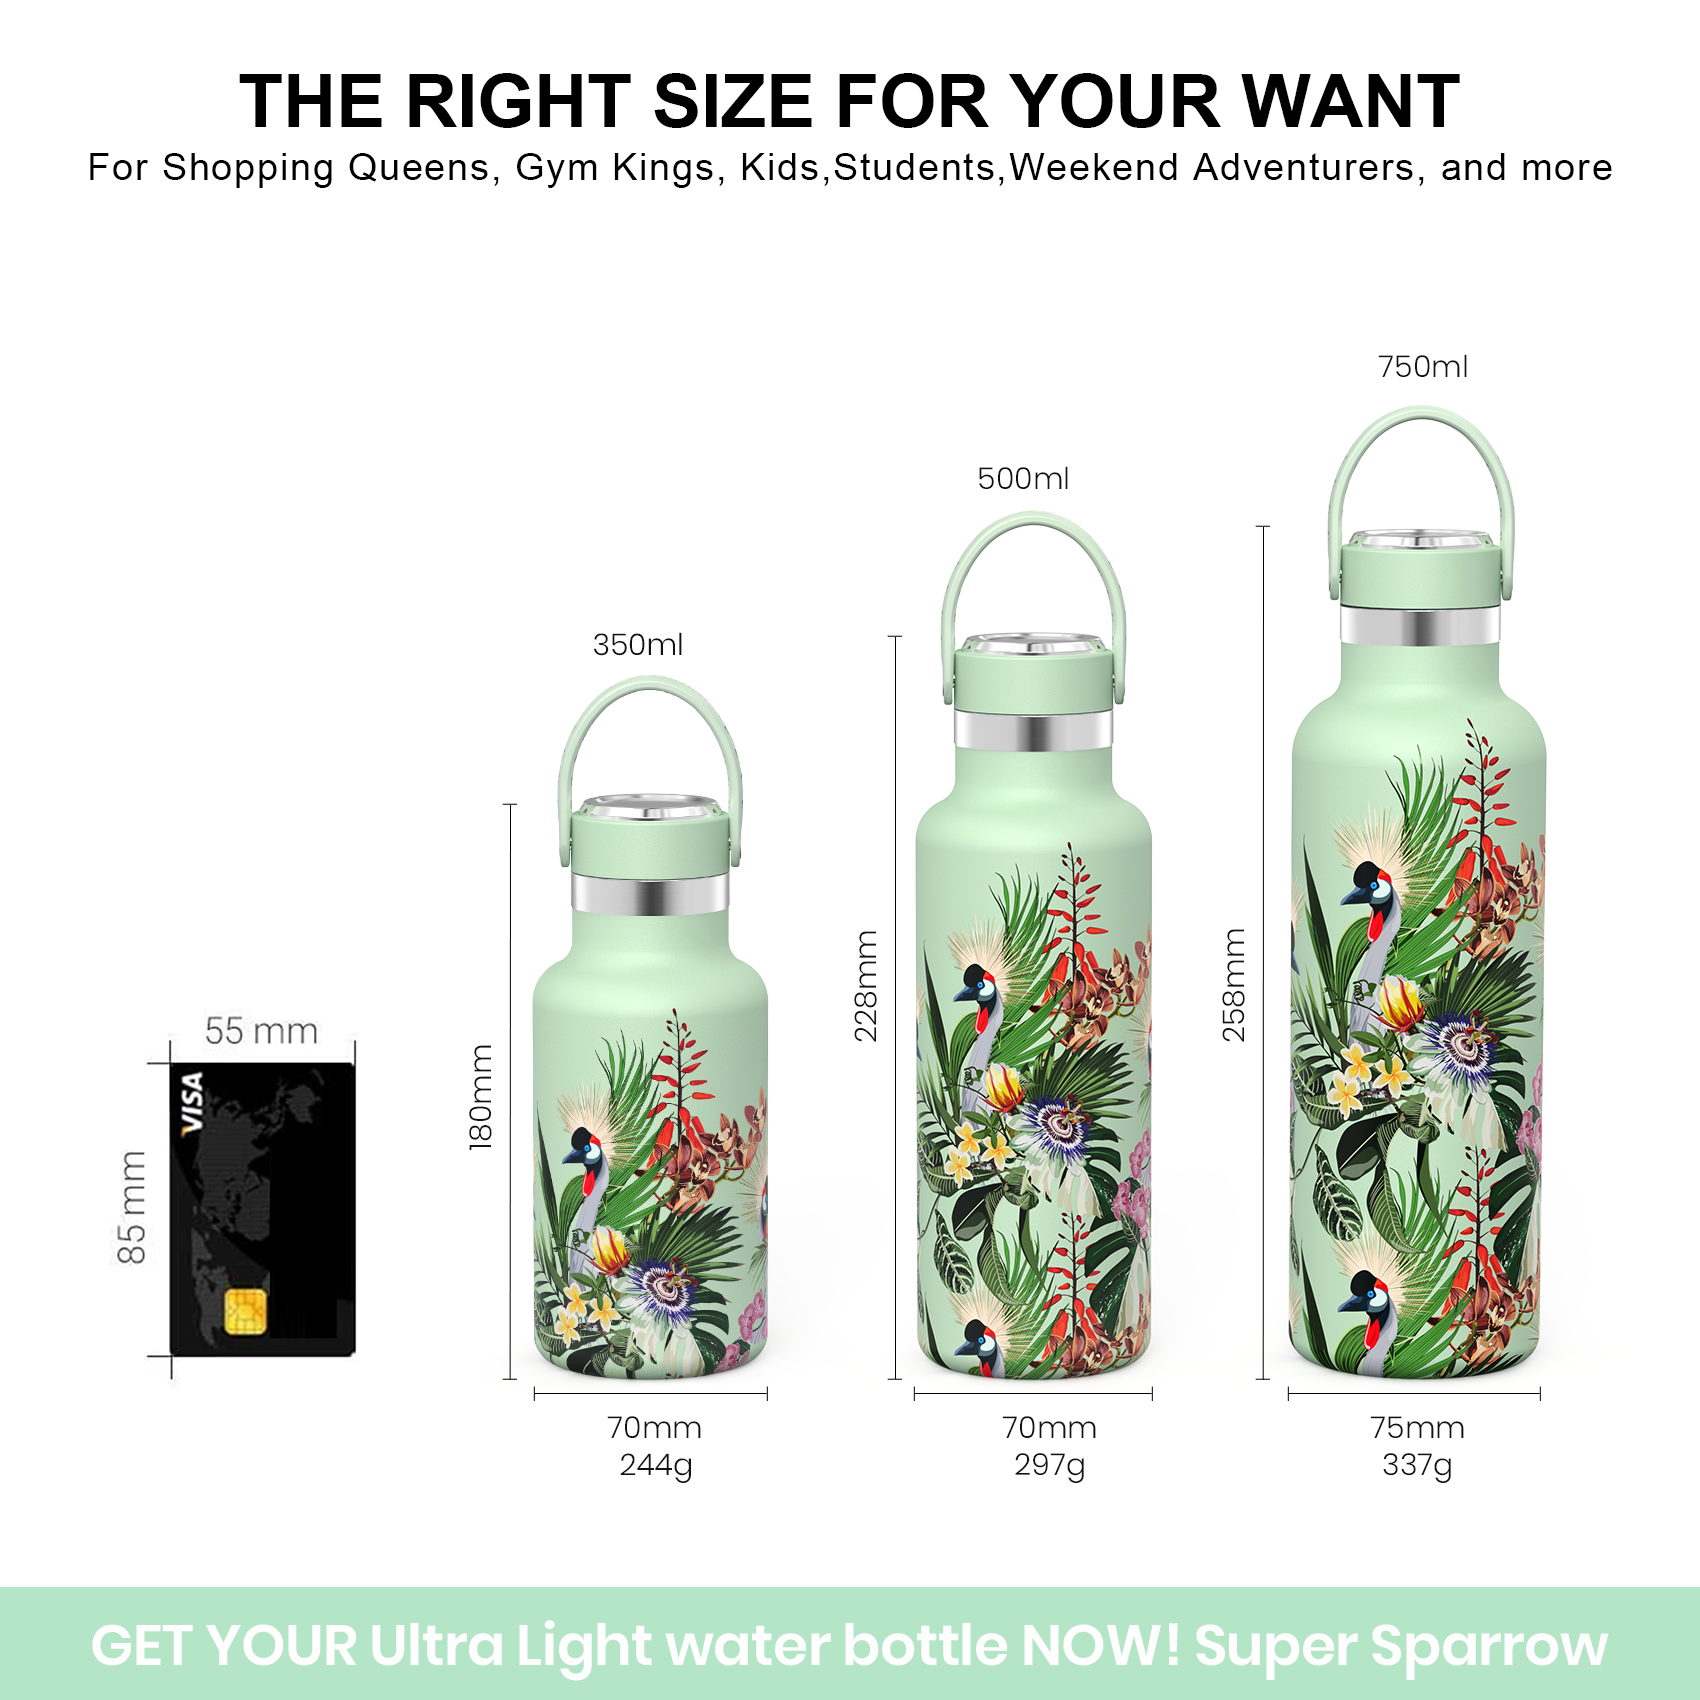 Super Sparrow 1500ml Sports Water Bottle - Unscripted Review and Unboxing  #ad 